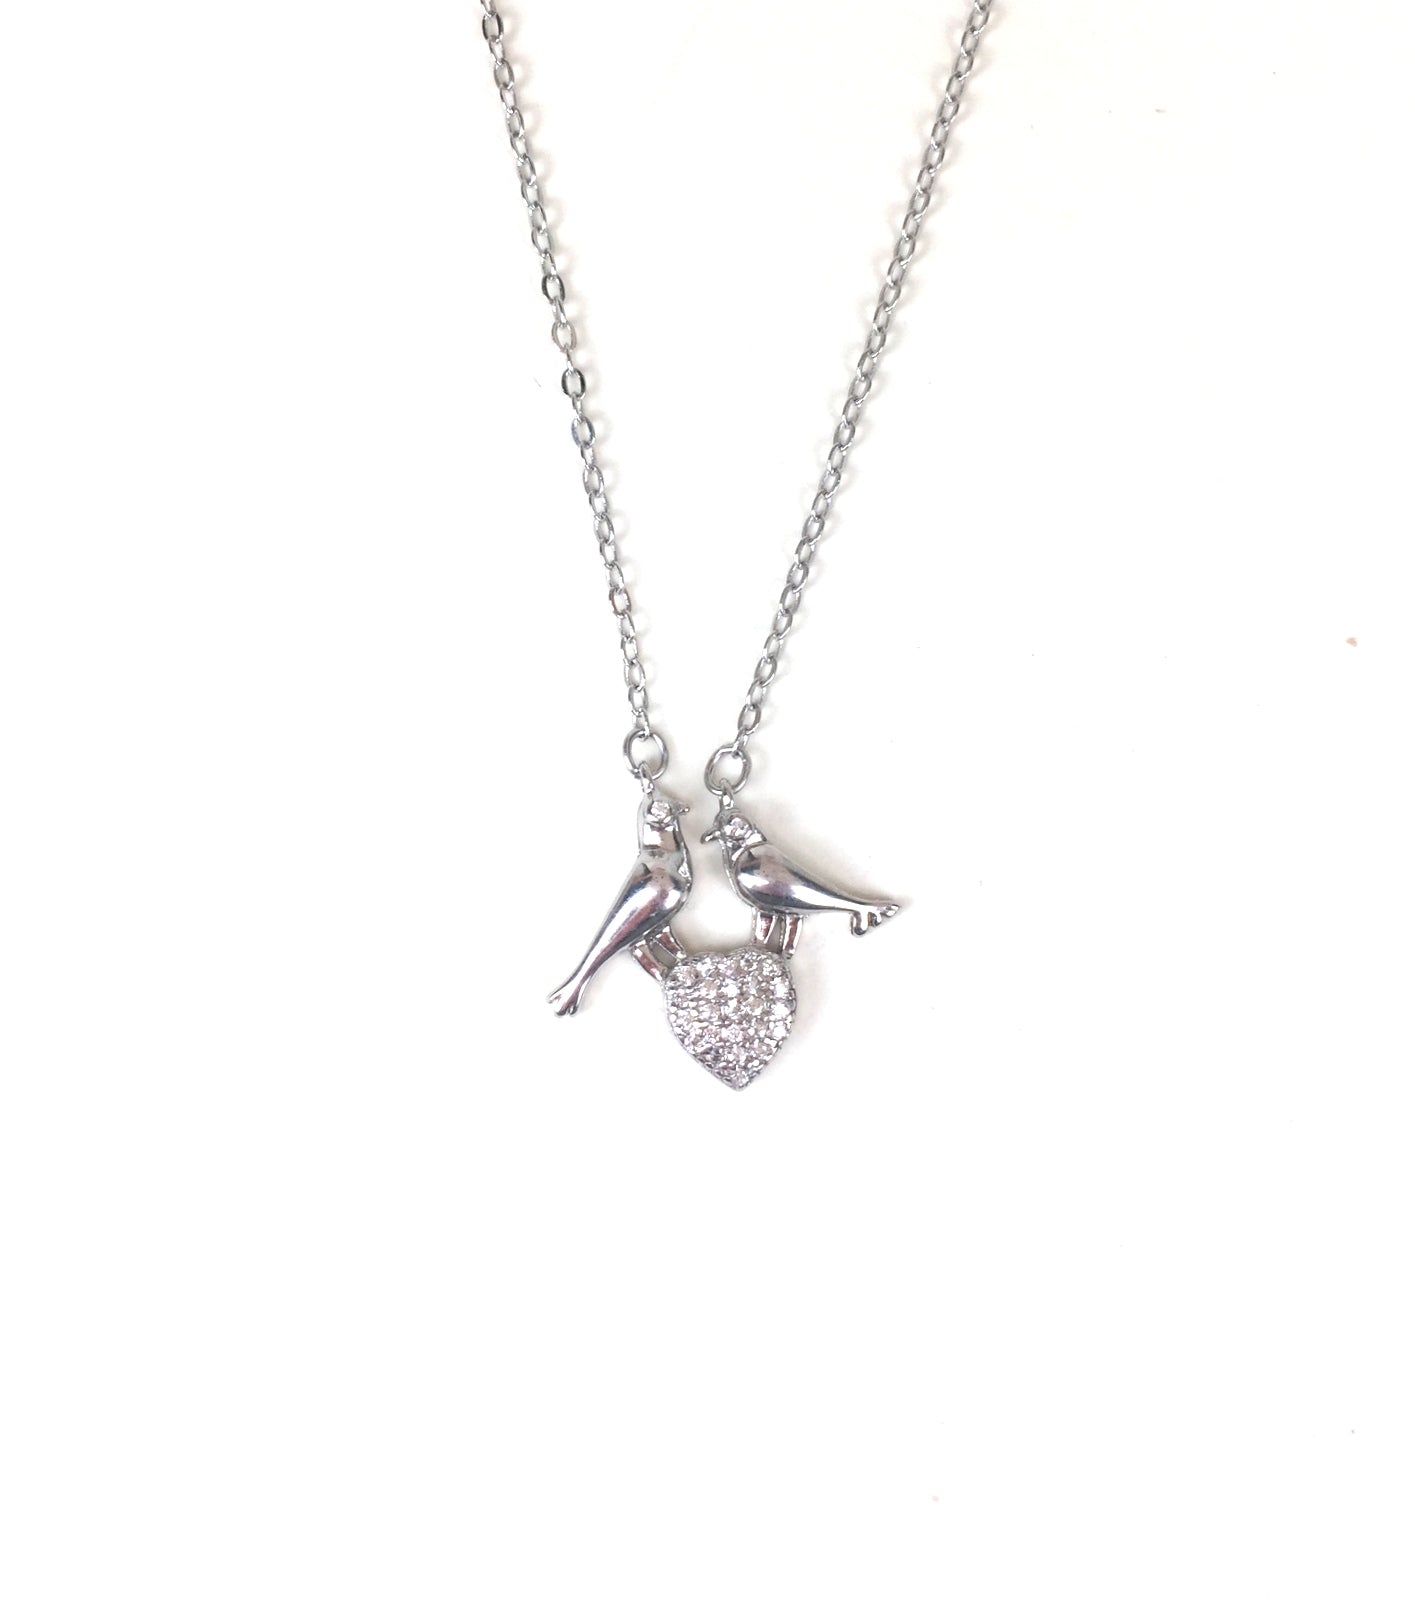 TWO BIRDS AND HEART PAVE CZ STERLING SILVER NECKLACE